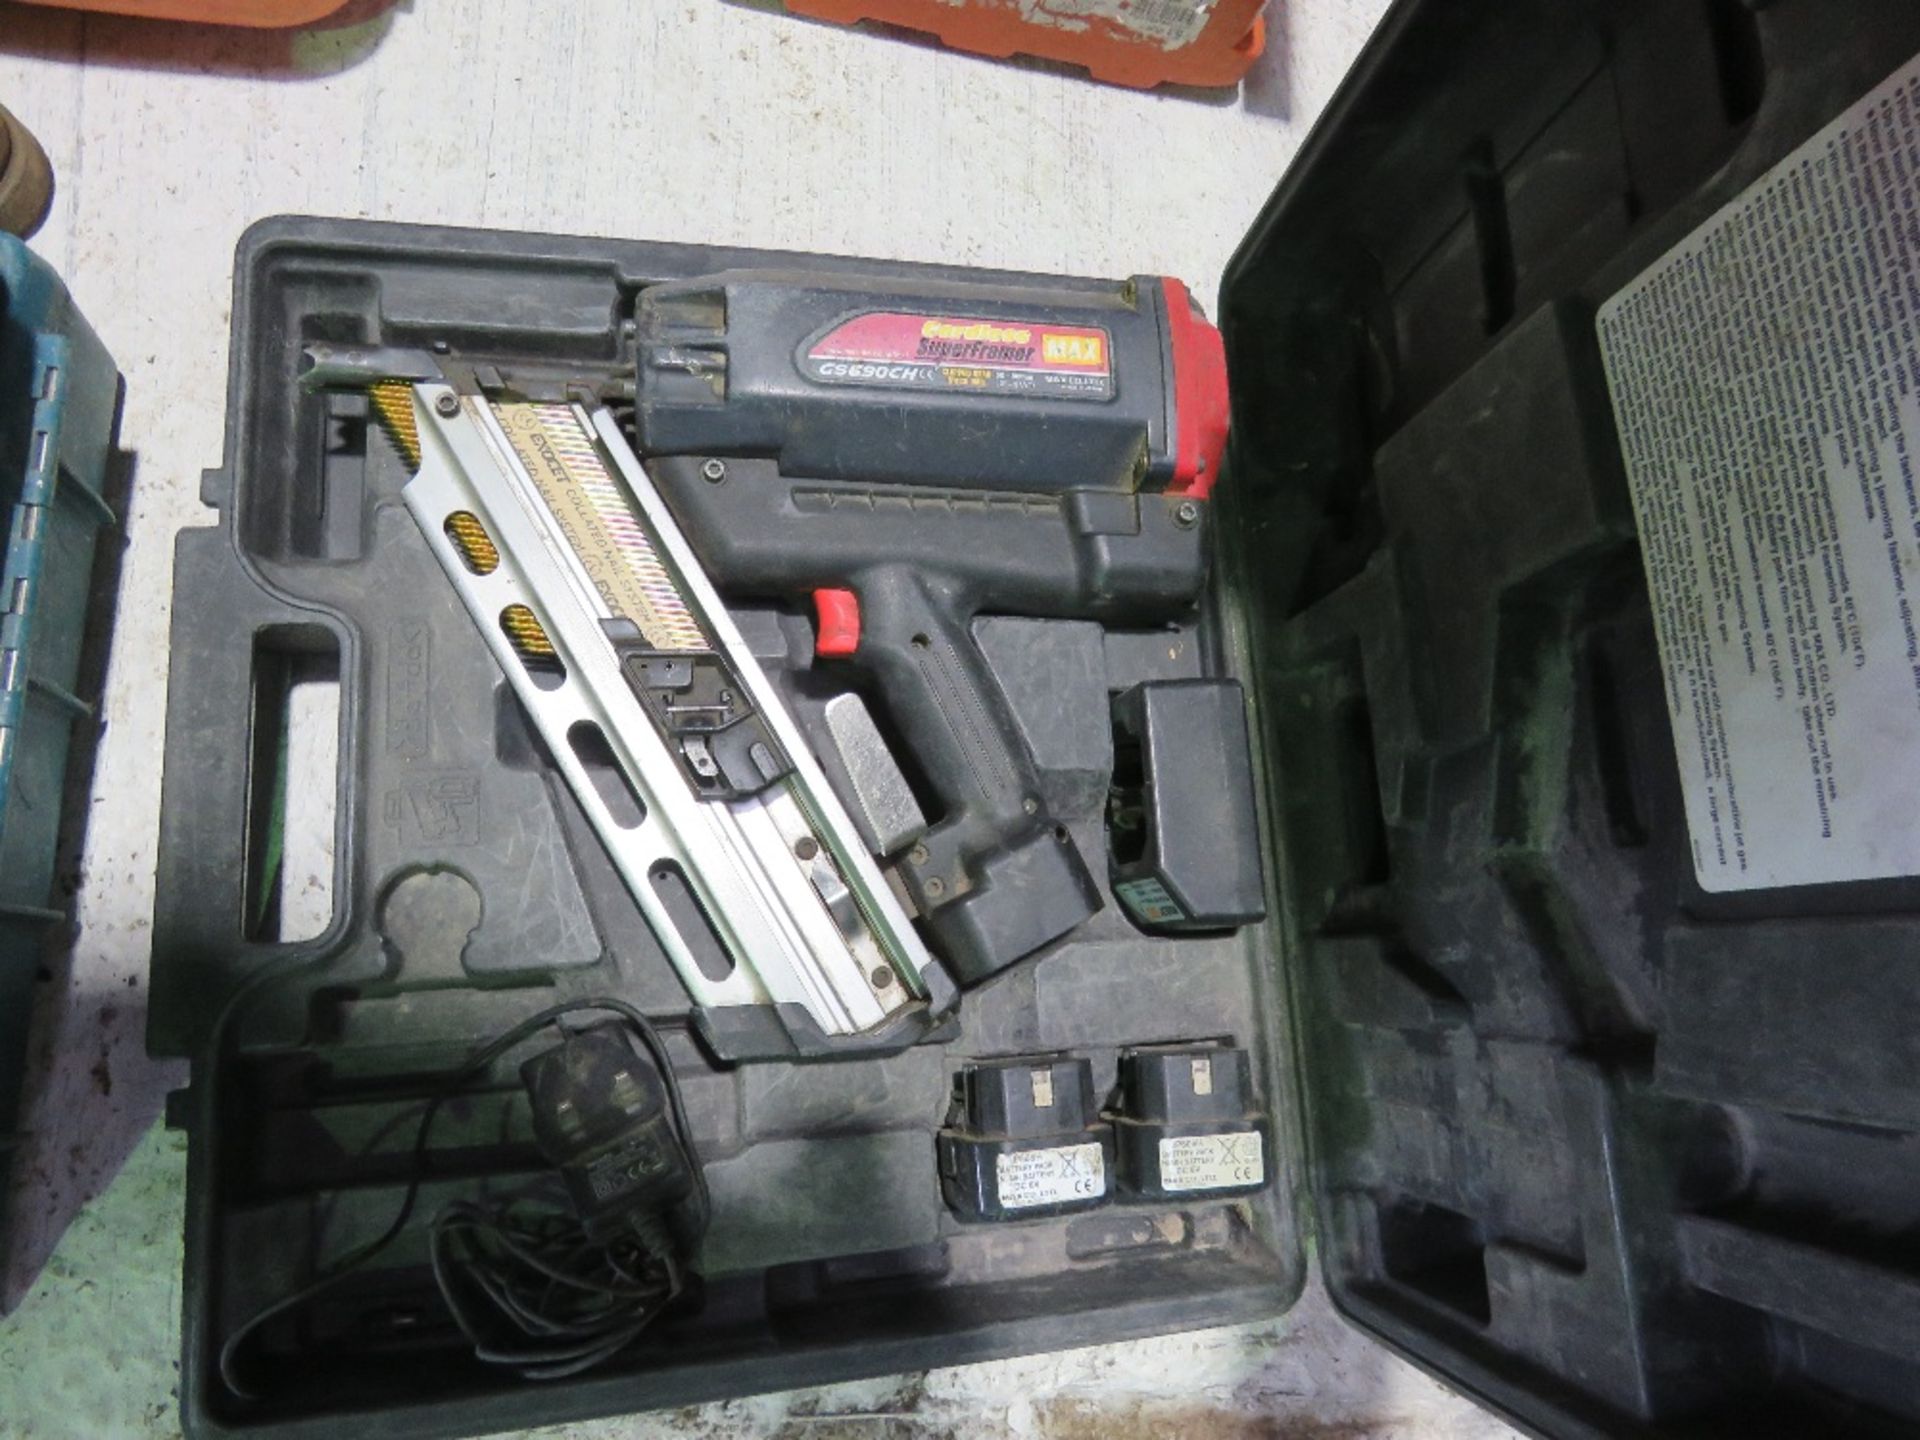 MAXPOWER NAIL GUN IN A CASE. ....THIS LOT IS SOLD UNDER THE AUCTIONEERS MARGIN SCHEME, THEREFORE NO - Image 3 of 3